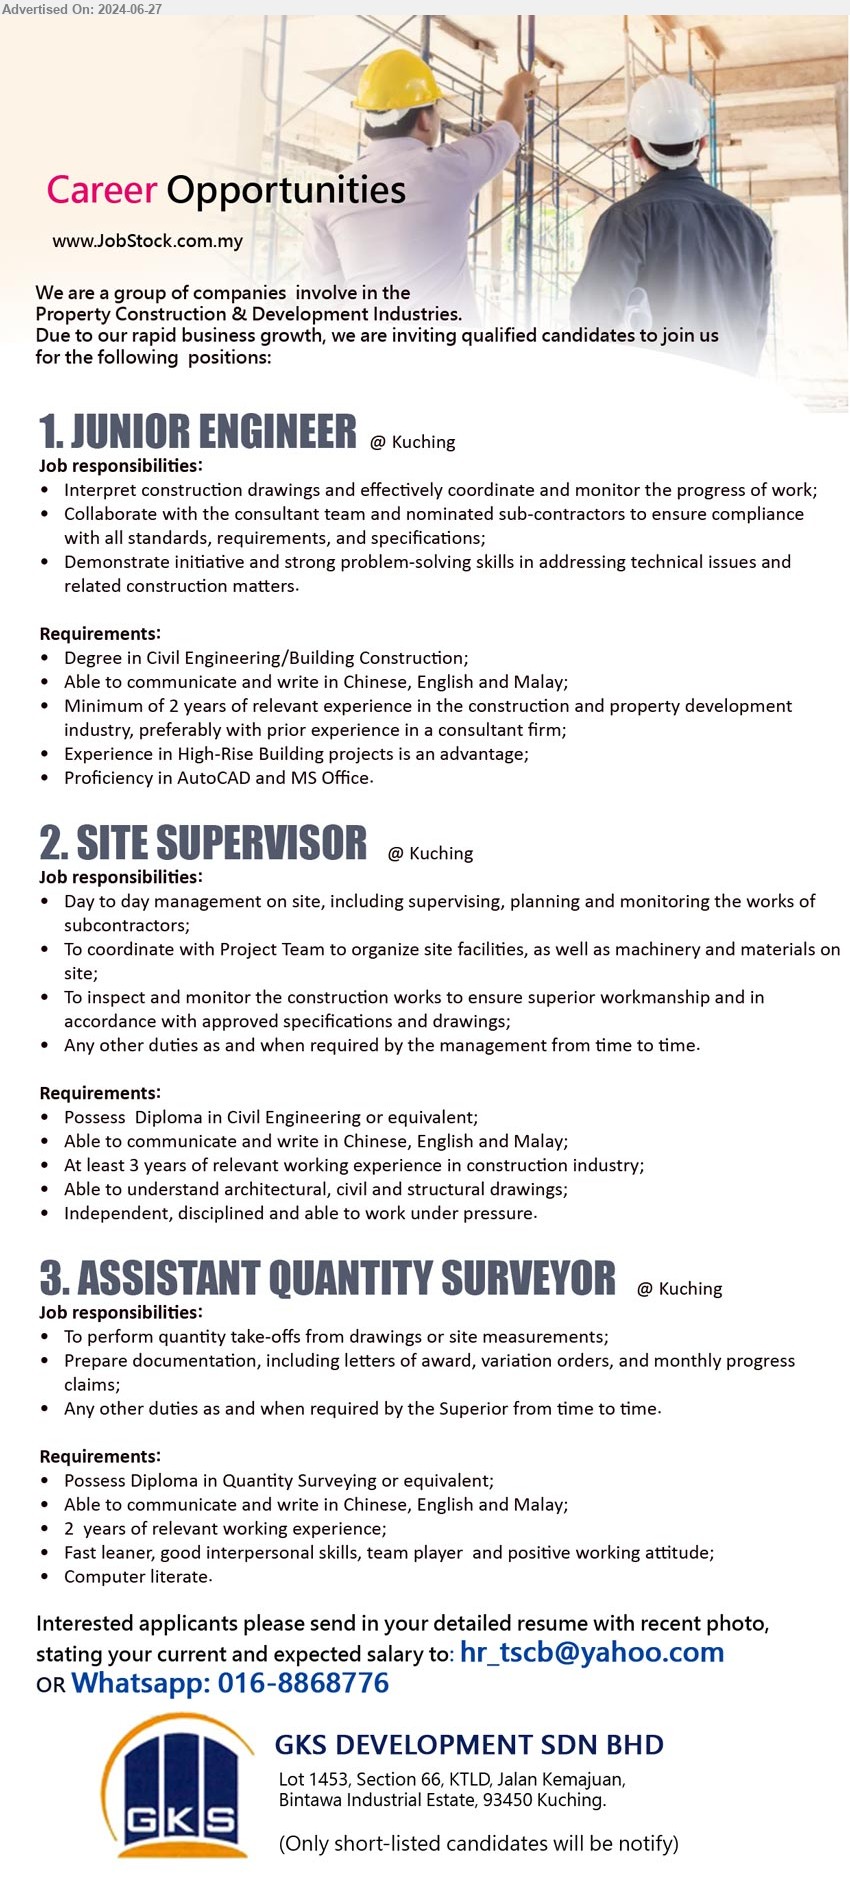 GKS DEVELOPMENT SDN BHD - 1. JUNIOR ENGINEER (Kuching), Degree in Civil Engineering/Building Construction;, proficiency in AutoCAD and MS Office.	,...
2. SITE SUPERVISOR  (Kuching), Diploma in Civil Engineering, At least 3 years of relevant working experience in construction industry,...
3. ASSISTANT QUANTITY SURVEYOR (Kuching), Diploma in Quantity Surveying , 2  years of relevant working experience;,...
Whatsapp: 016-8868776 / Email resume to ...